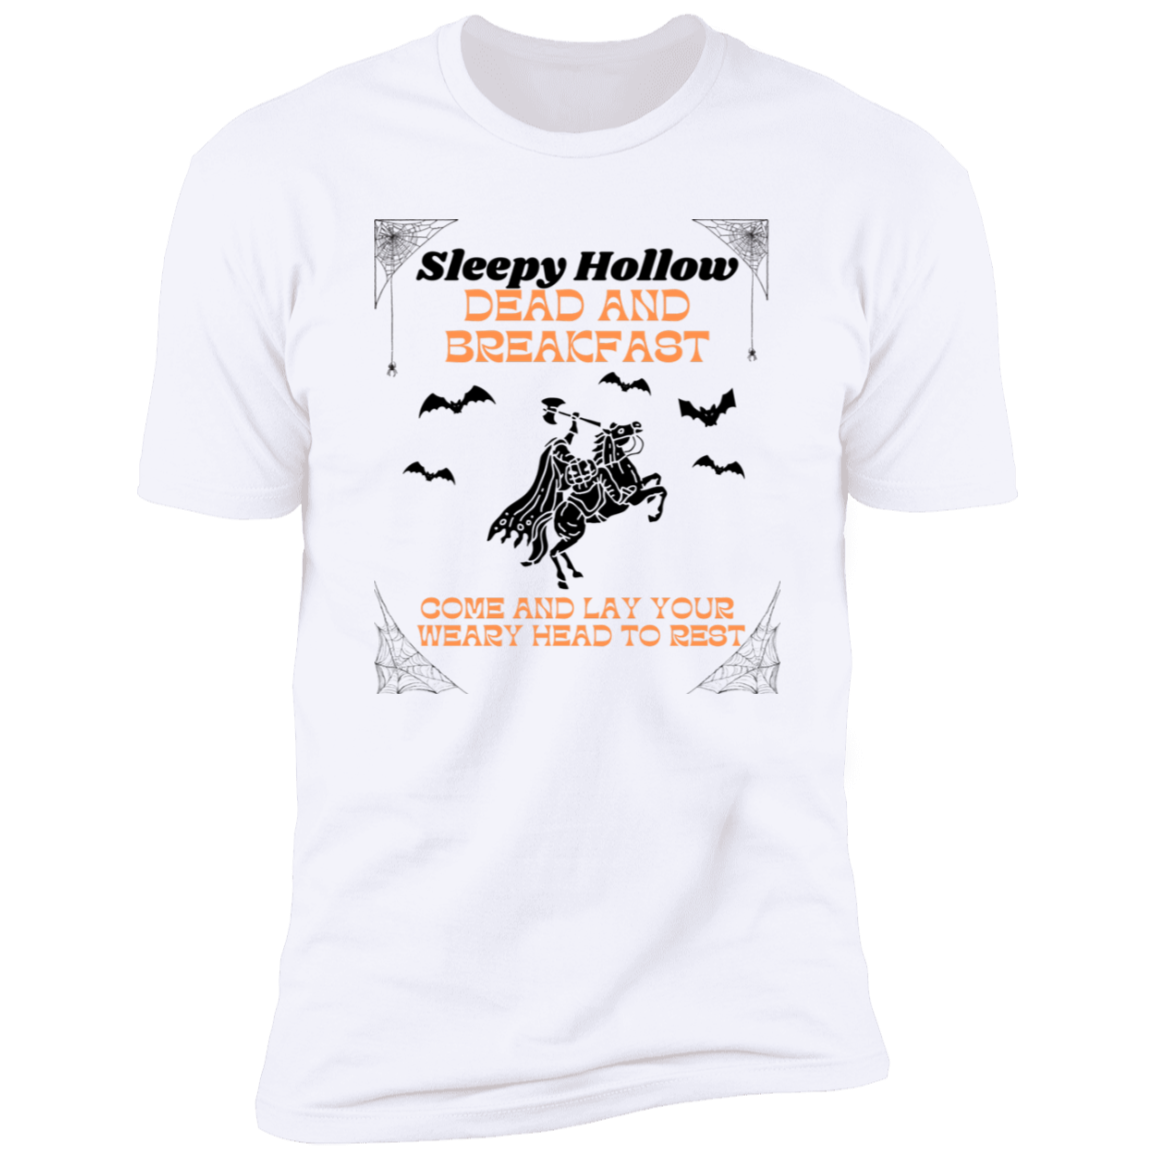 Get trendy with Sleepy Hollow Dead and Breakfast  Premium Short Sleeve Tee - T-Shirts available at Good Gift Company. Grab yours for $19.95 today!